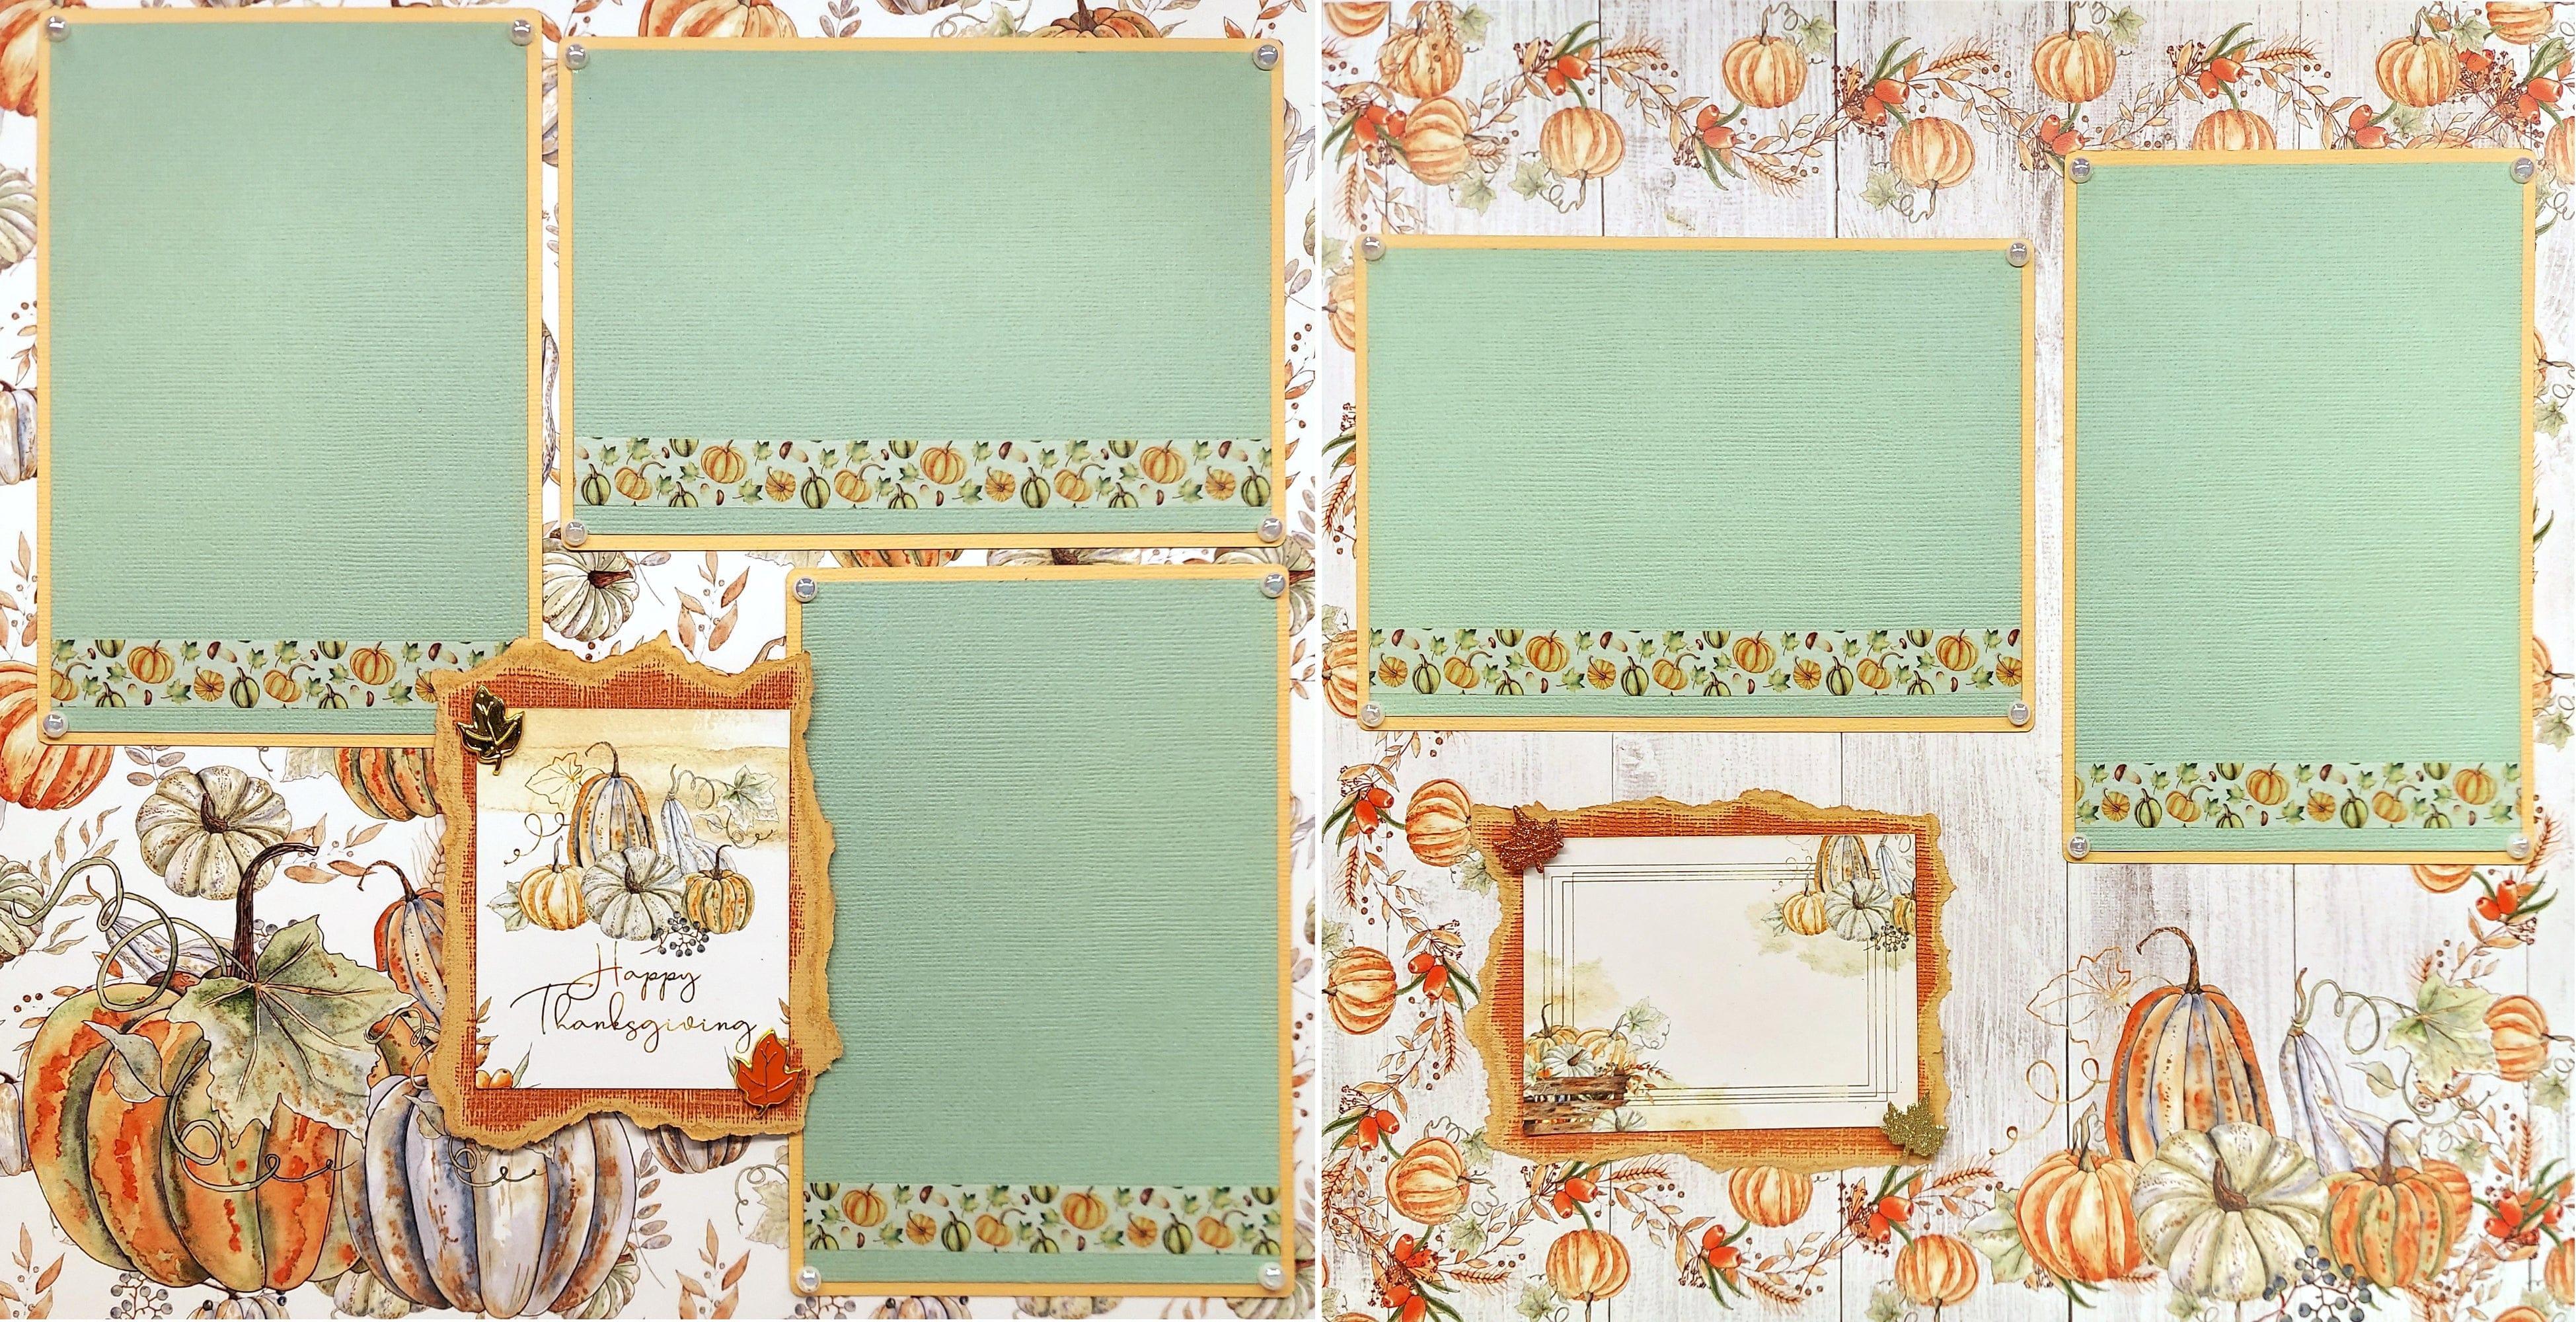 Pumpkin Patch Happy Thanksgiving (2) - 12 x 12 Pages, Fully-Assembled & Hand-Crafted 3D Scrapbook Premade by SSC Designs